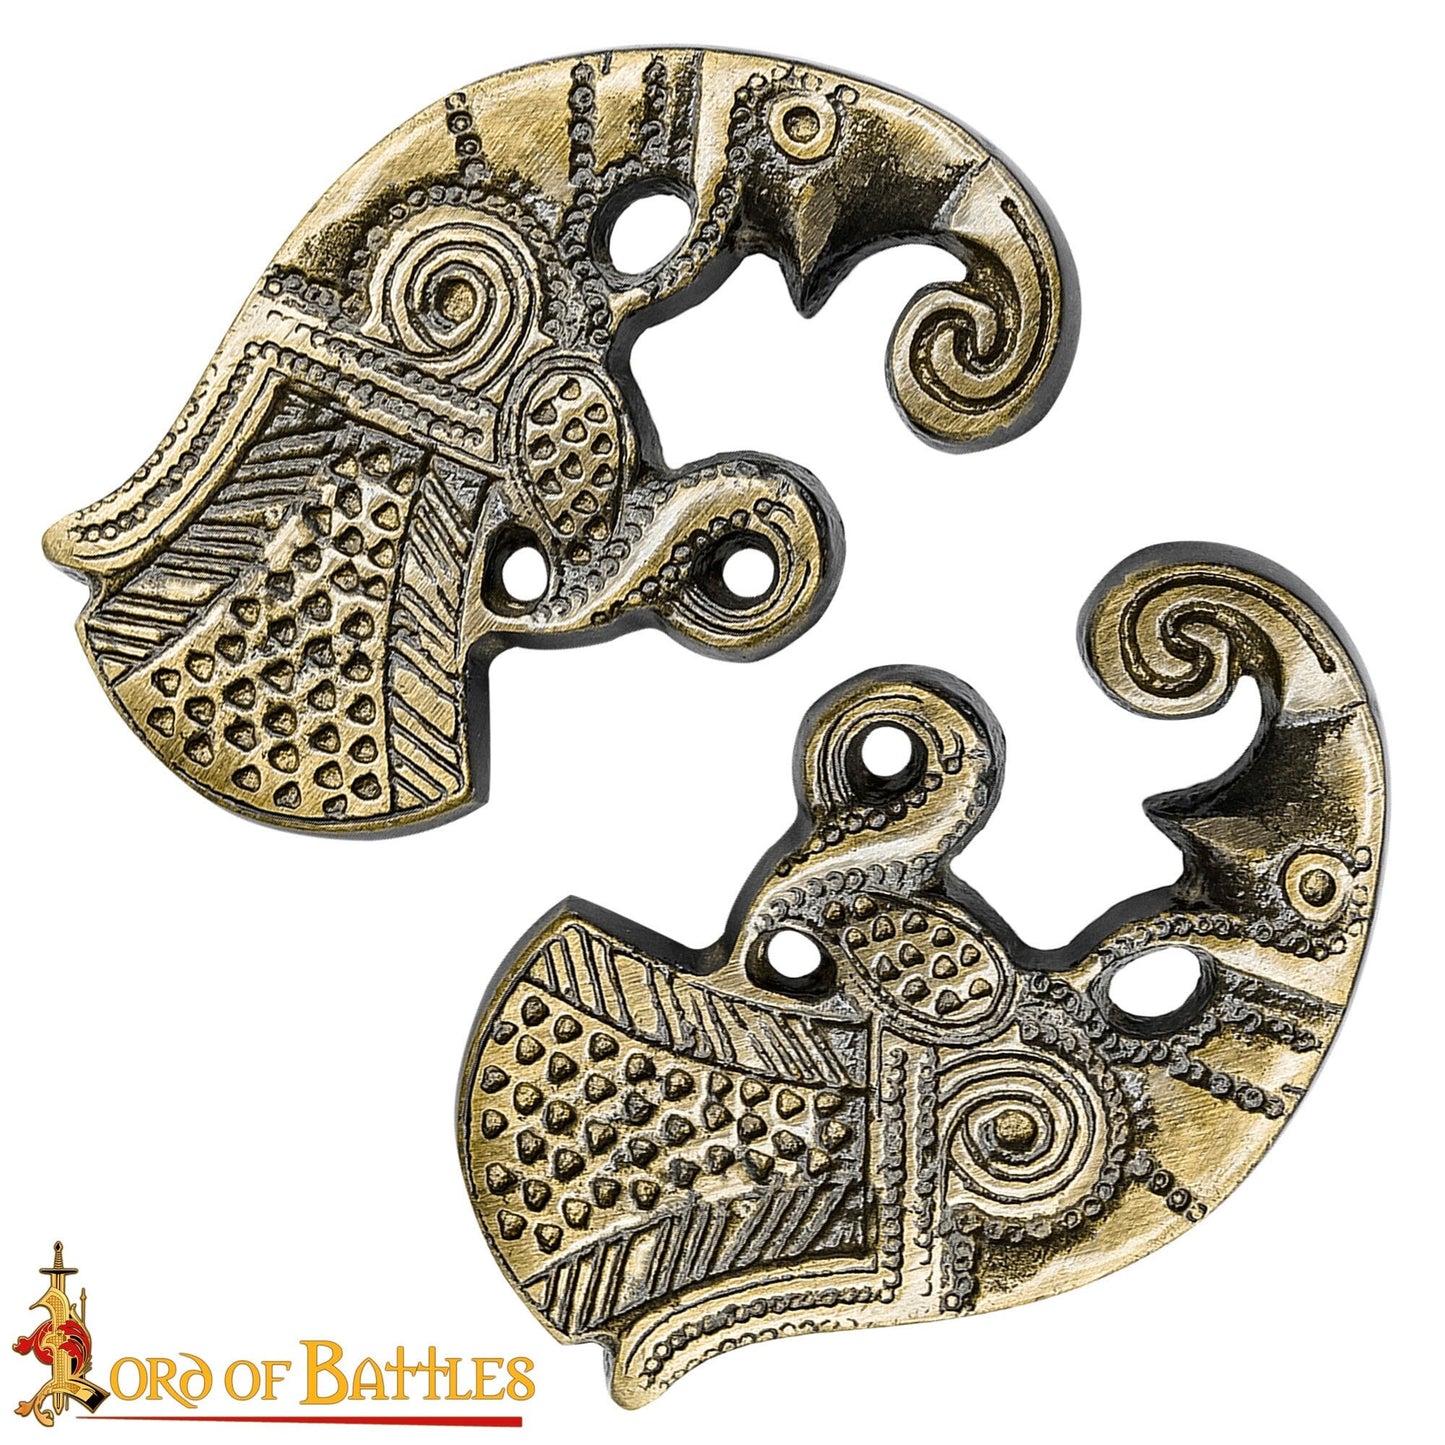 Pair of Frankish or Anglo-Saxon Eagles